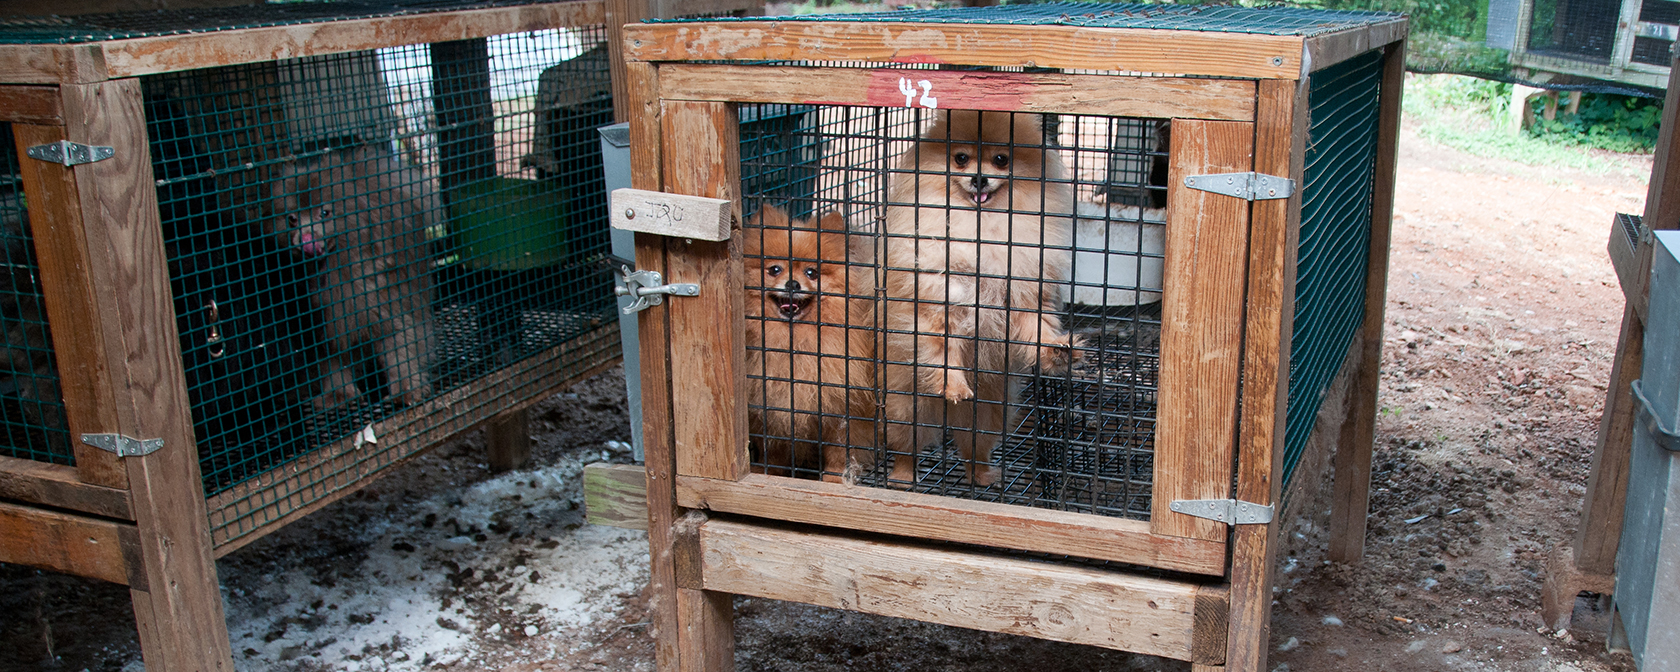 2022 was a winning year in our fight to stop puppy mills